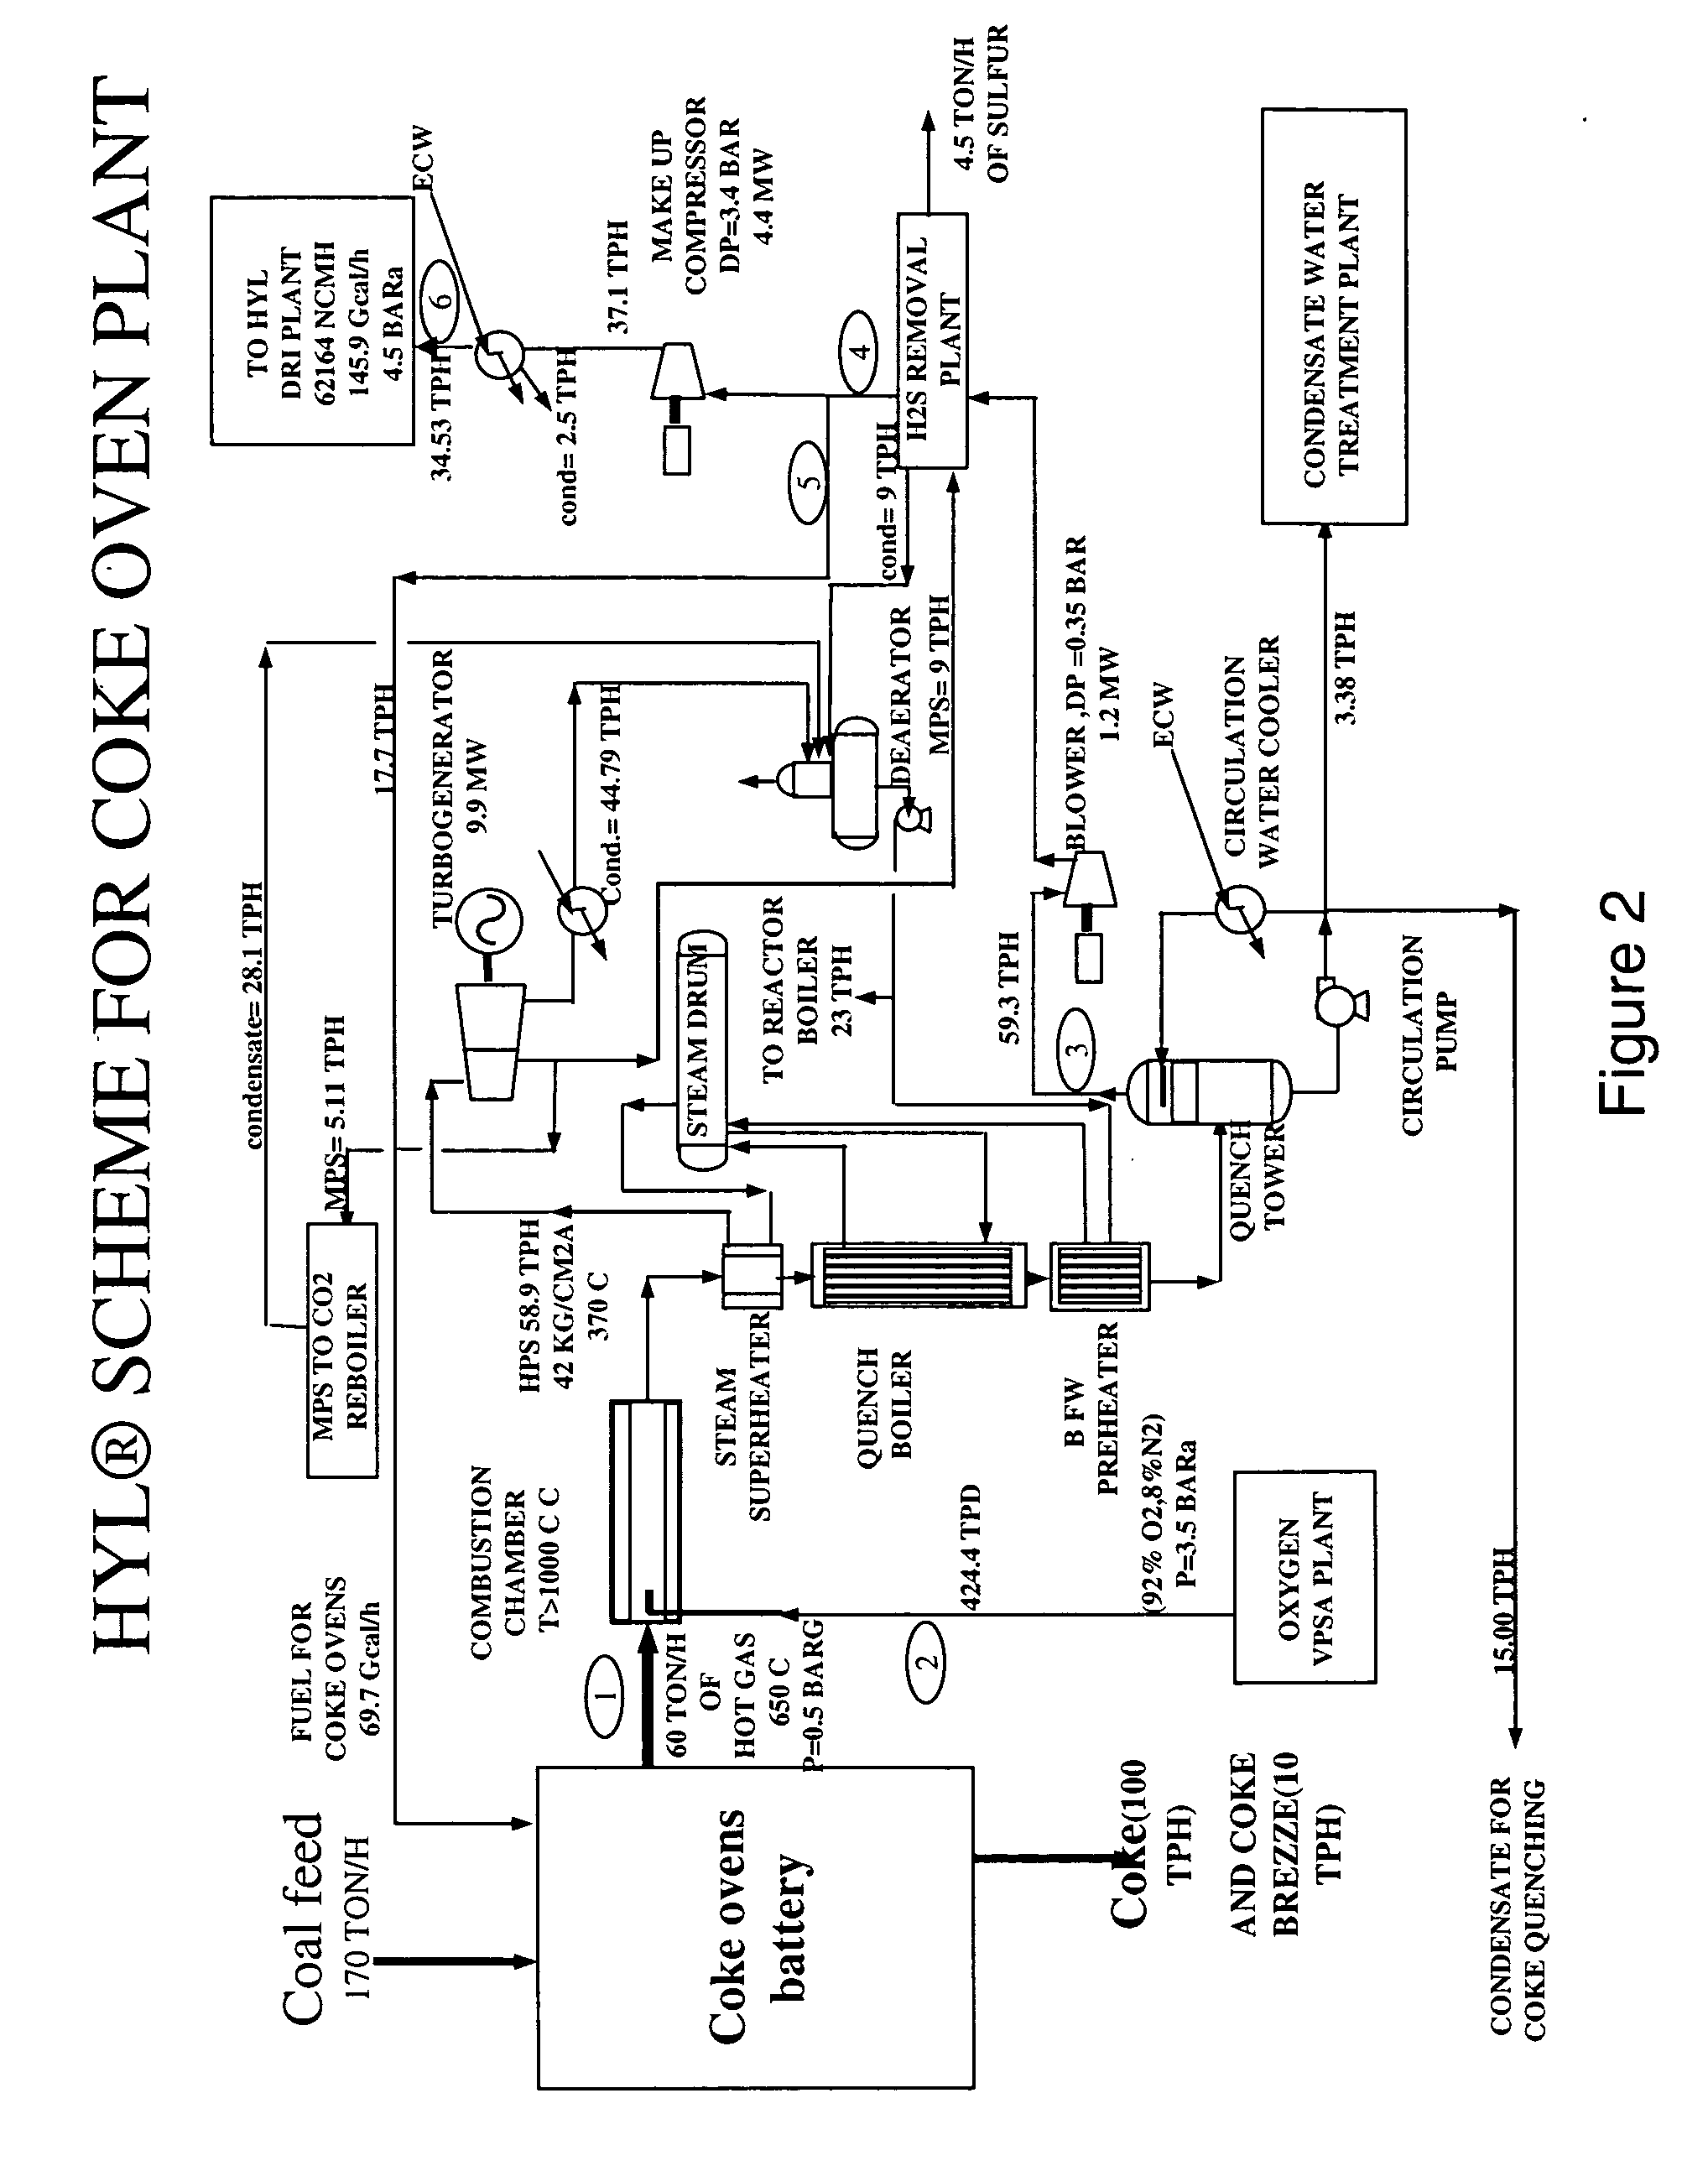 Method and apparatus for producing clean reducing gases from coke oven gas